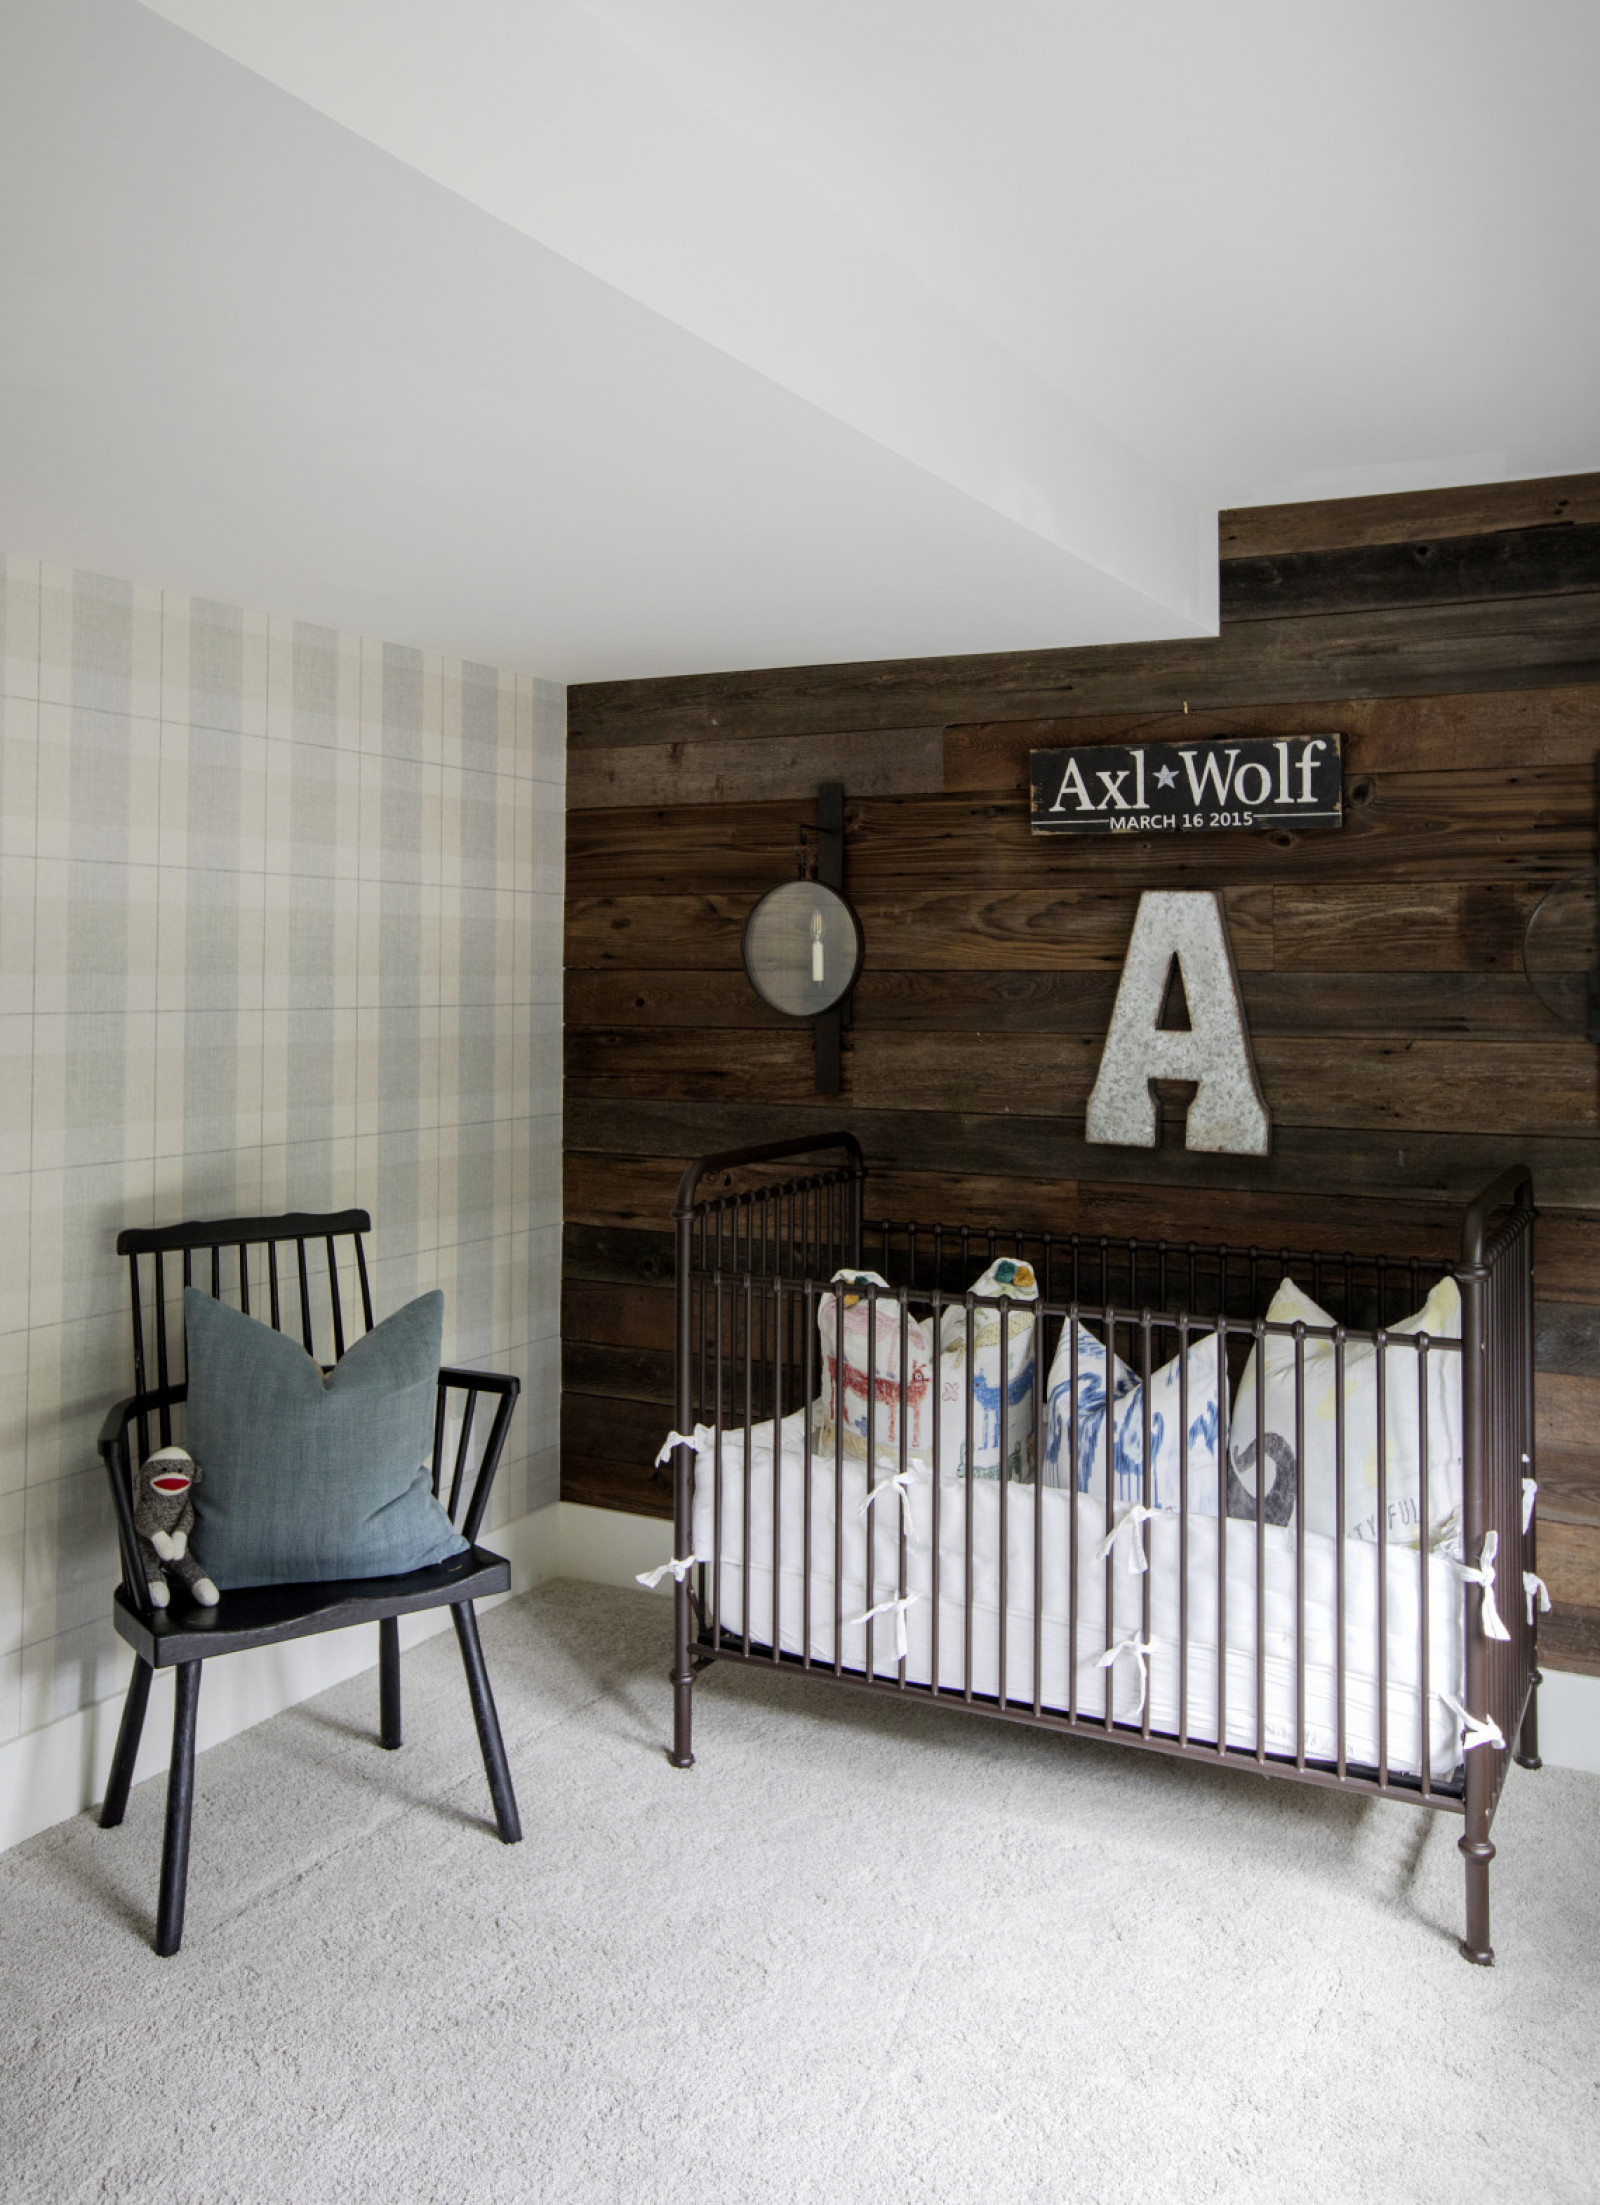 crib room with axl and wolf sign